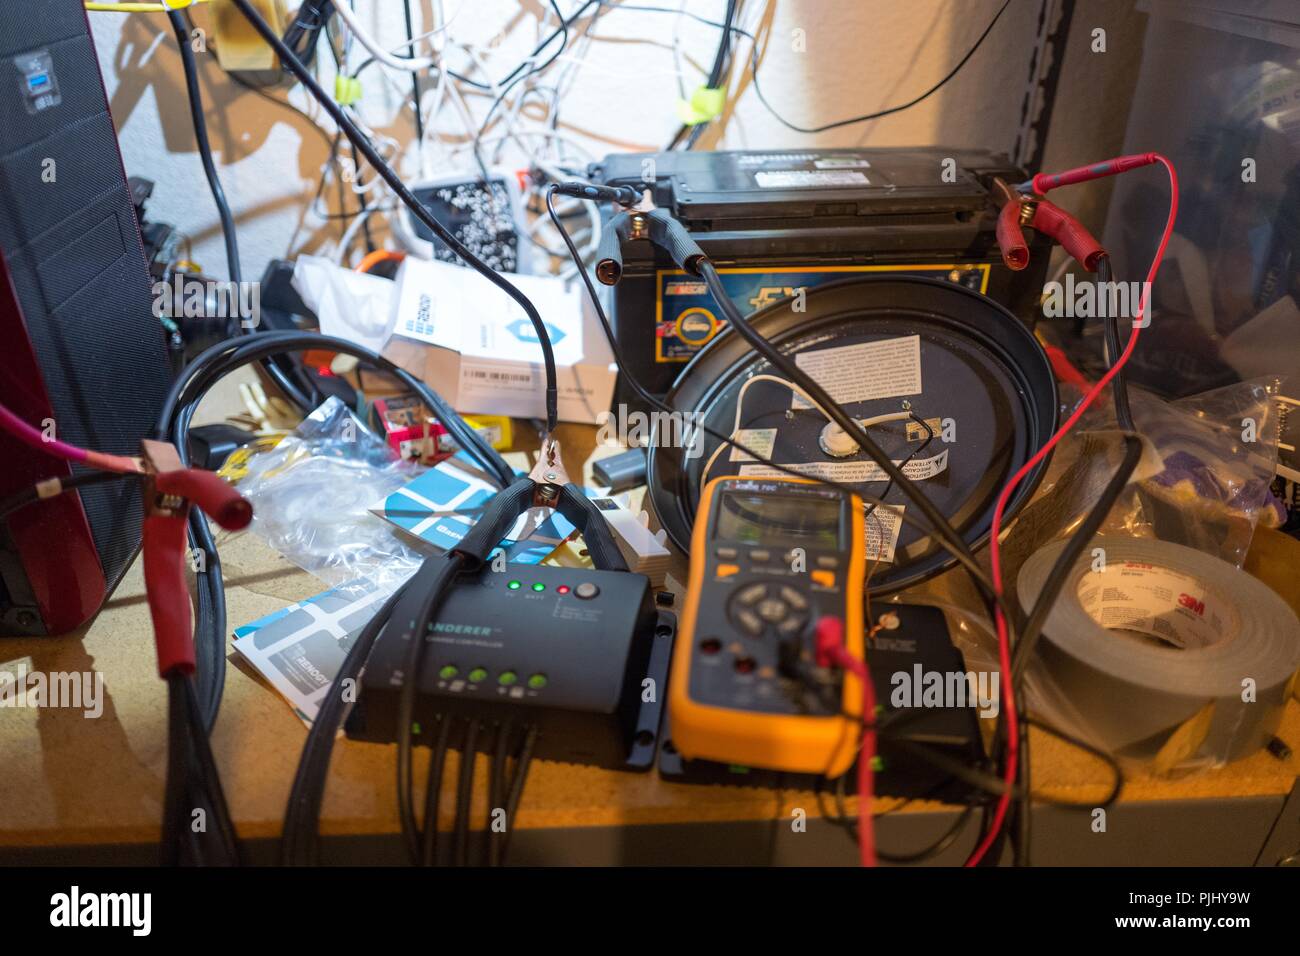 Cluttered electronics workshop with multimeter, battery, solar components and other electronics visible, September 6, 2018. () Stock Photo